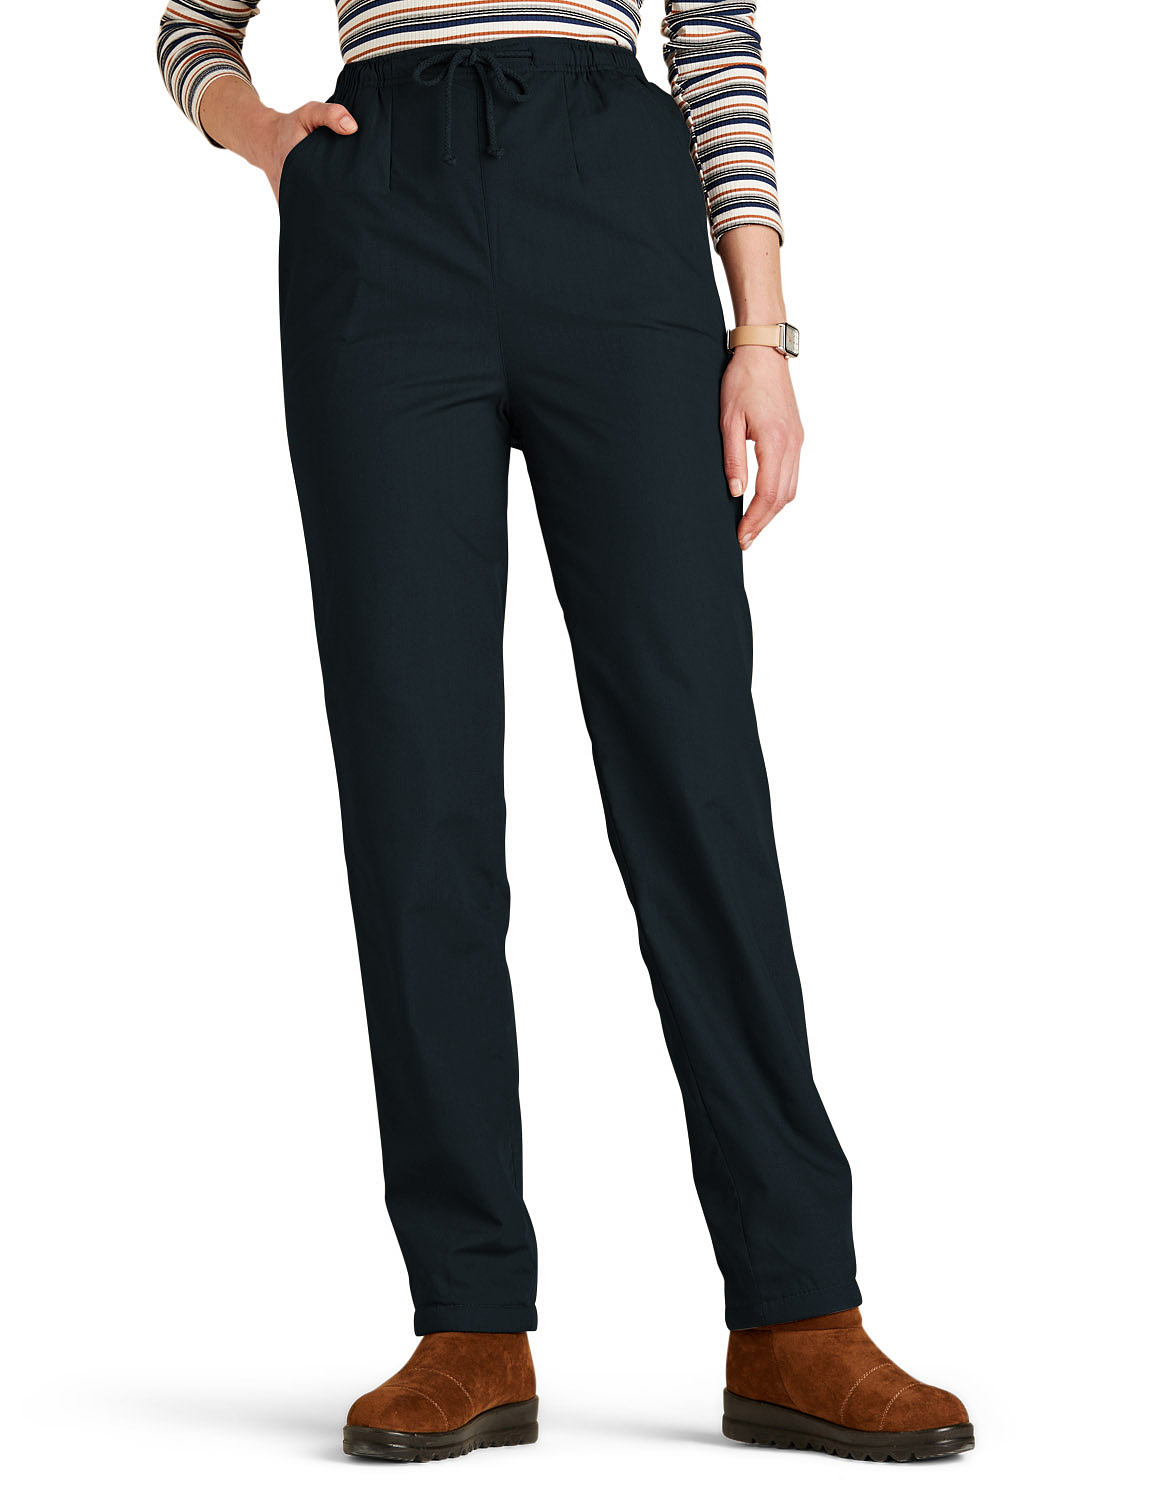 Ladies Thermal Lined Trouser | Chums